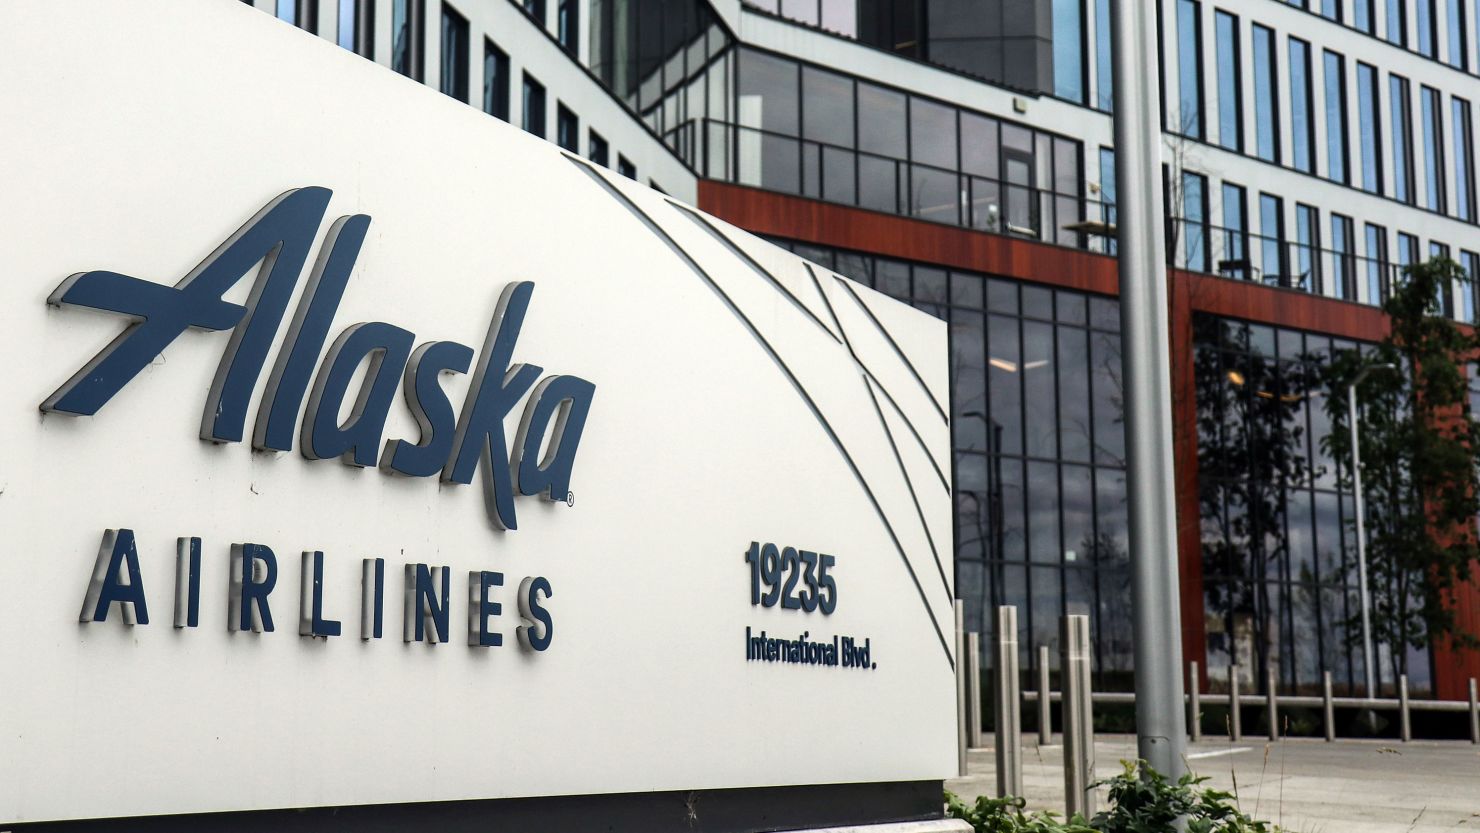 Mandatory Credit: Photo by Toby Scott/SOPA Images/Shutterstock (13034875b)
An Alaska Airlines corporate office building is seen in the company's headquarters city of SeaTac, Washington. Alaska Air Group (ALK) is scheduled to deliver its quarterly earnings report this week.
Signs and logos in US - 16 Jul 2022